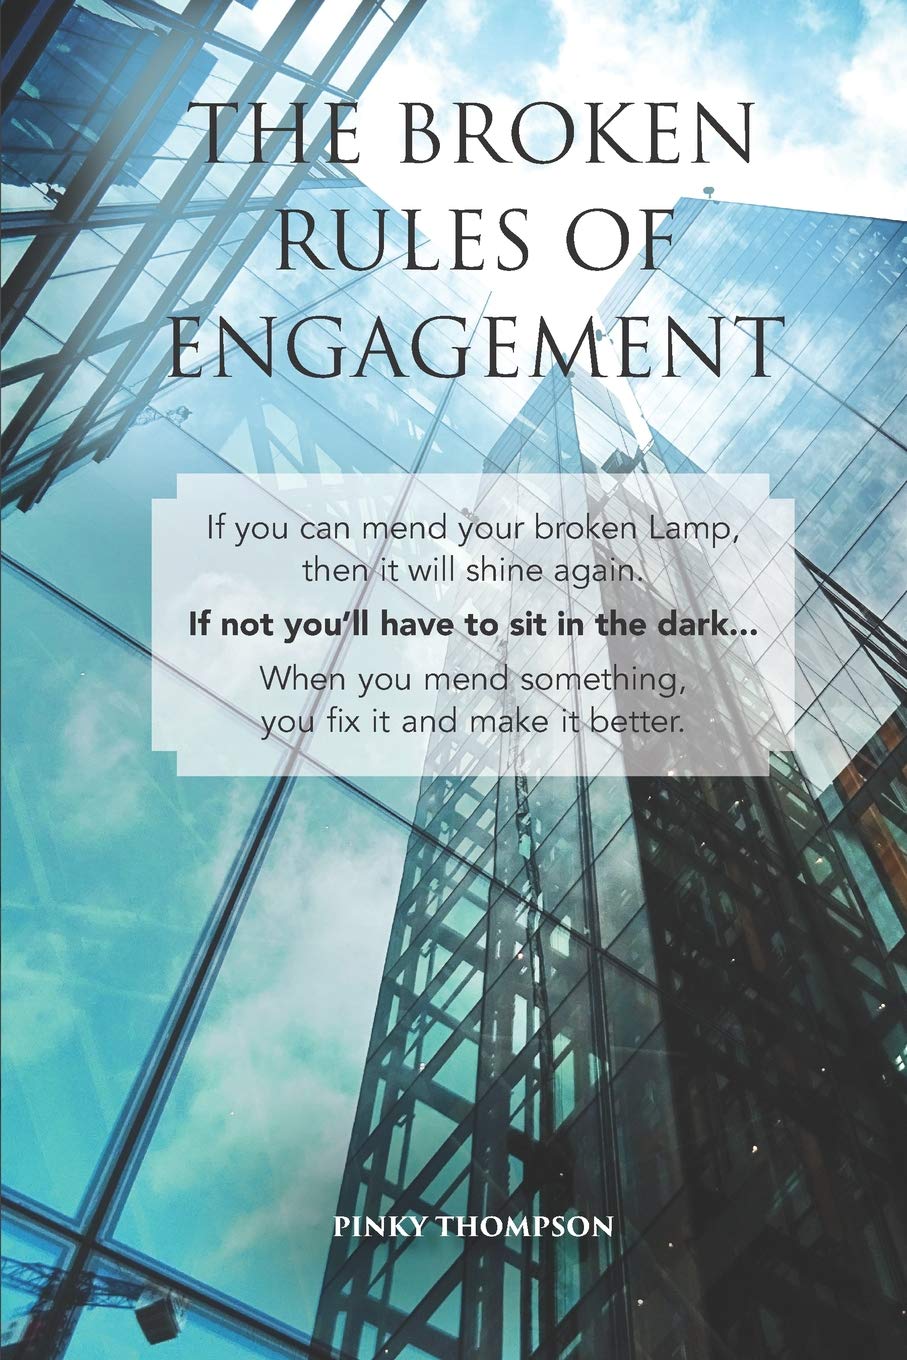 THE BROKEN RULES OF ENGAGEMENT